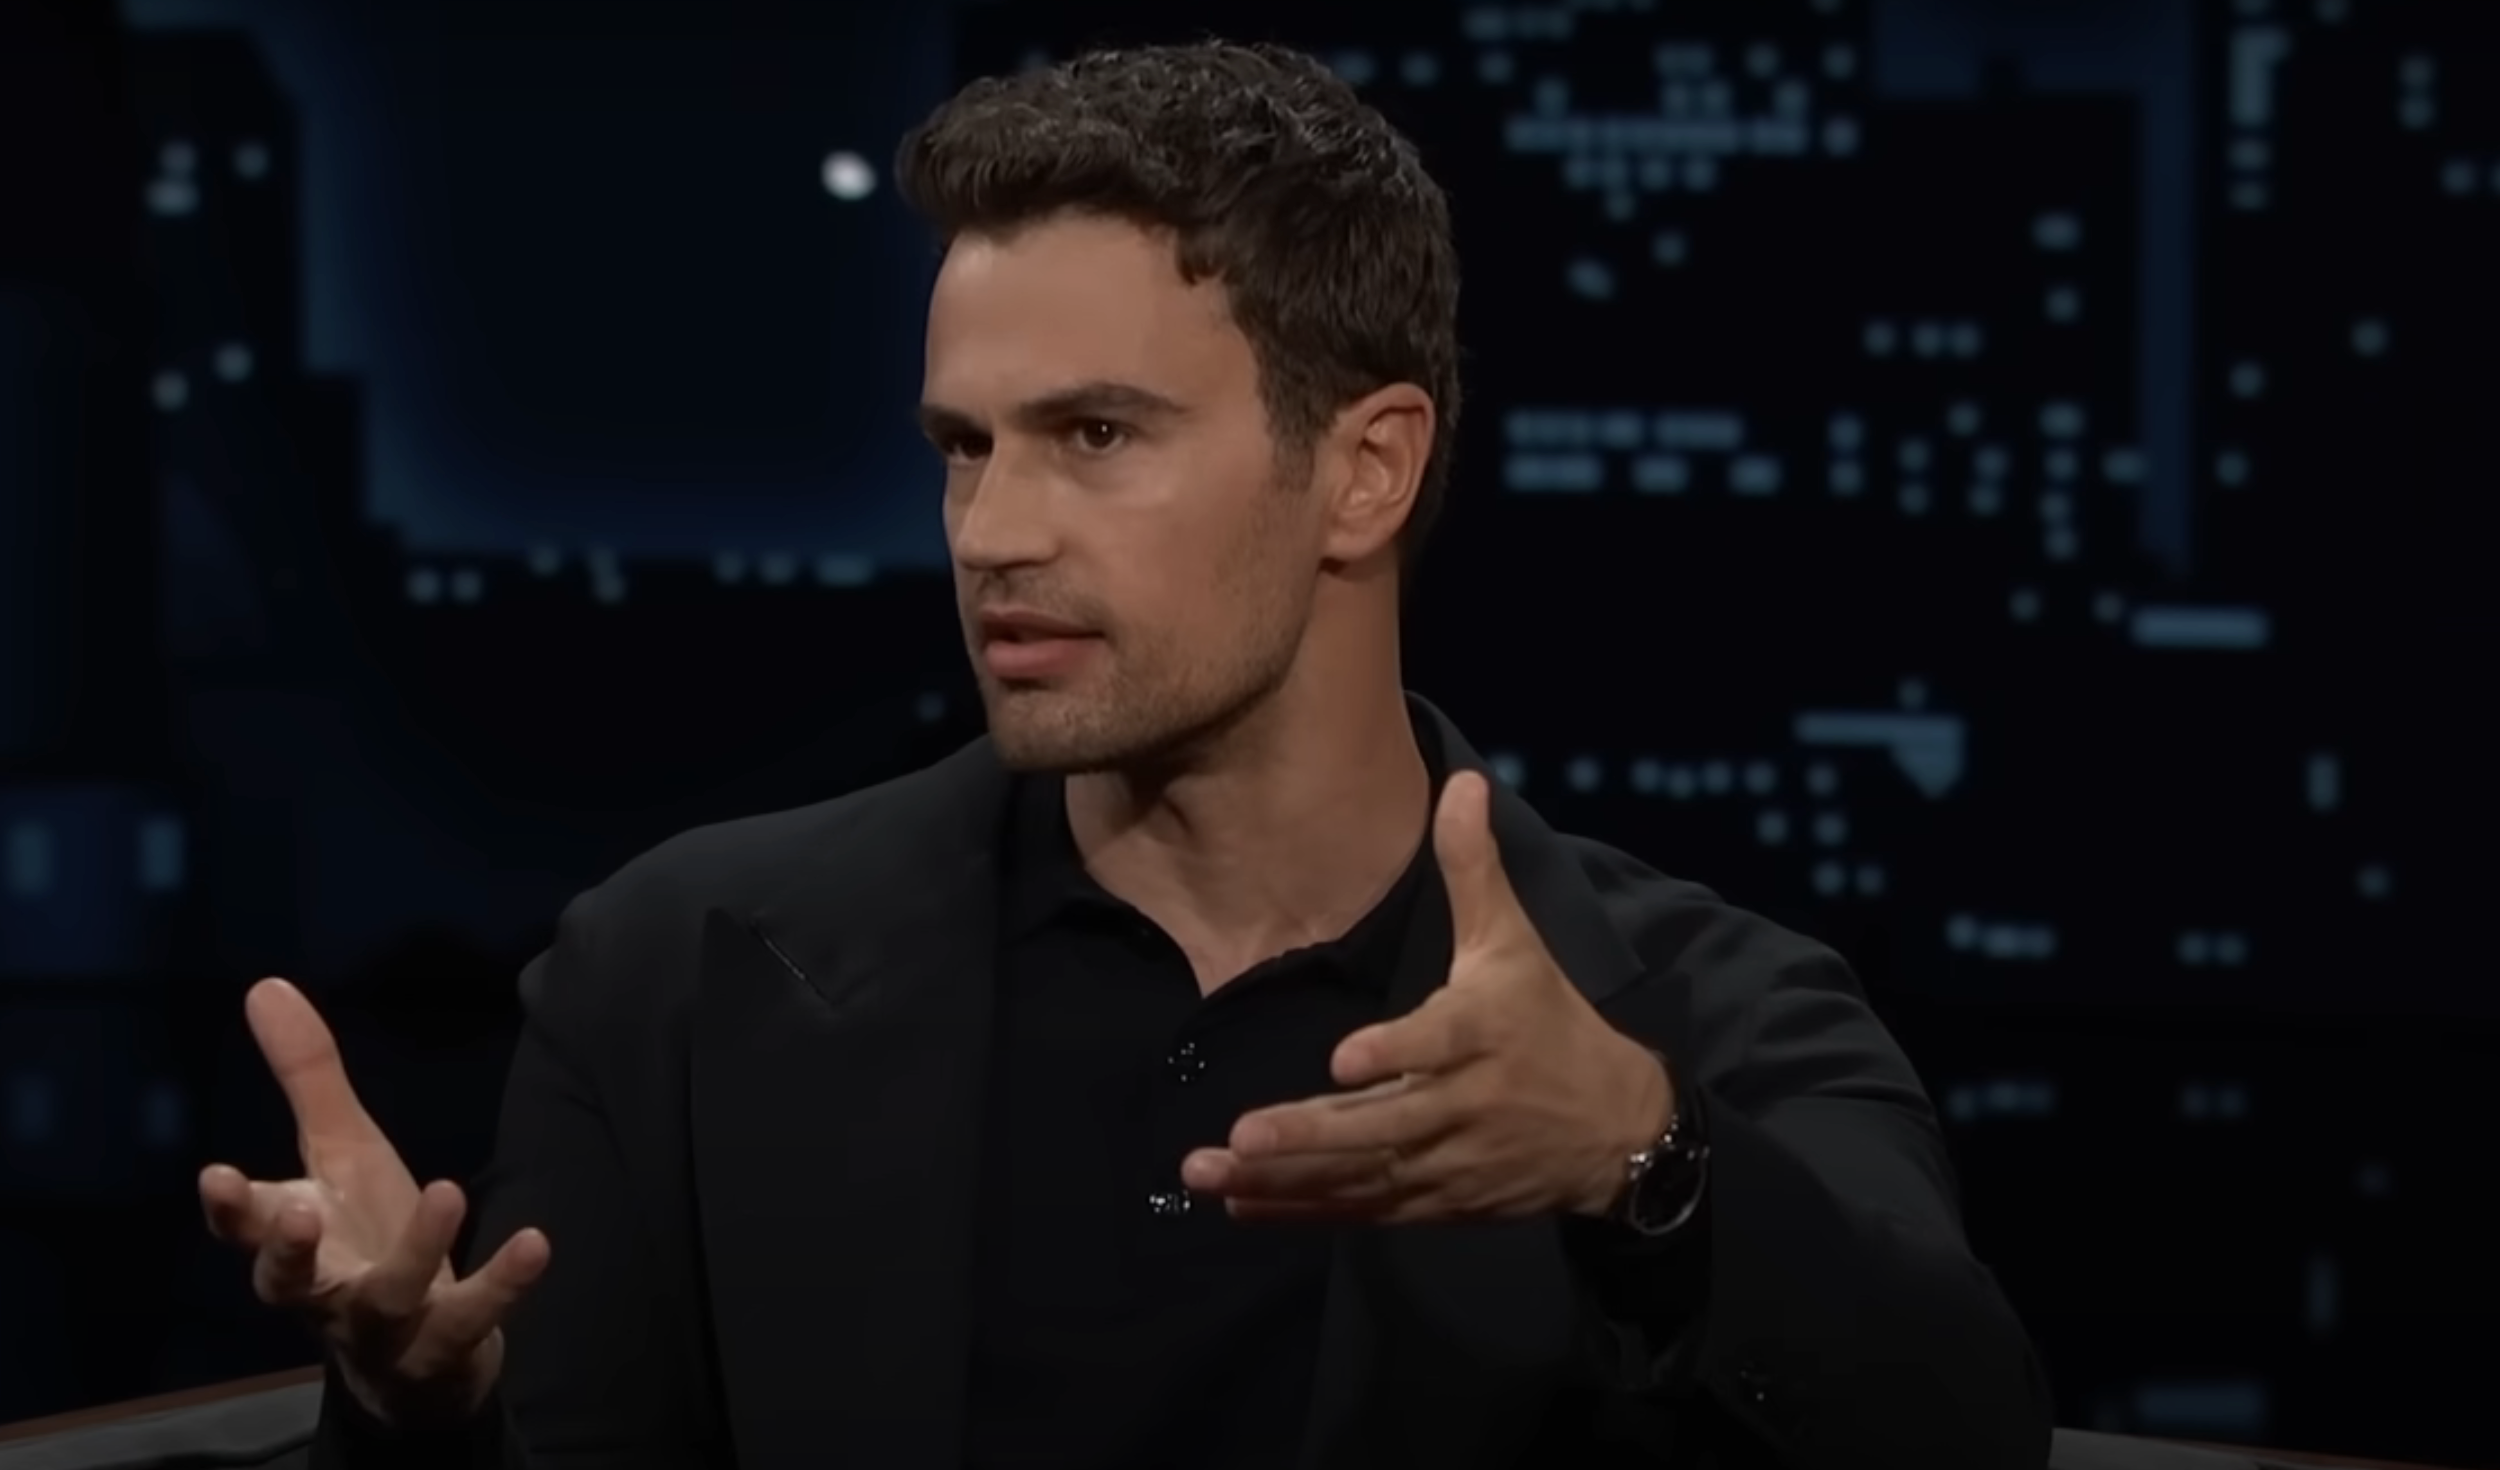 Man in black shirt gestures while speaking on a talk show